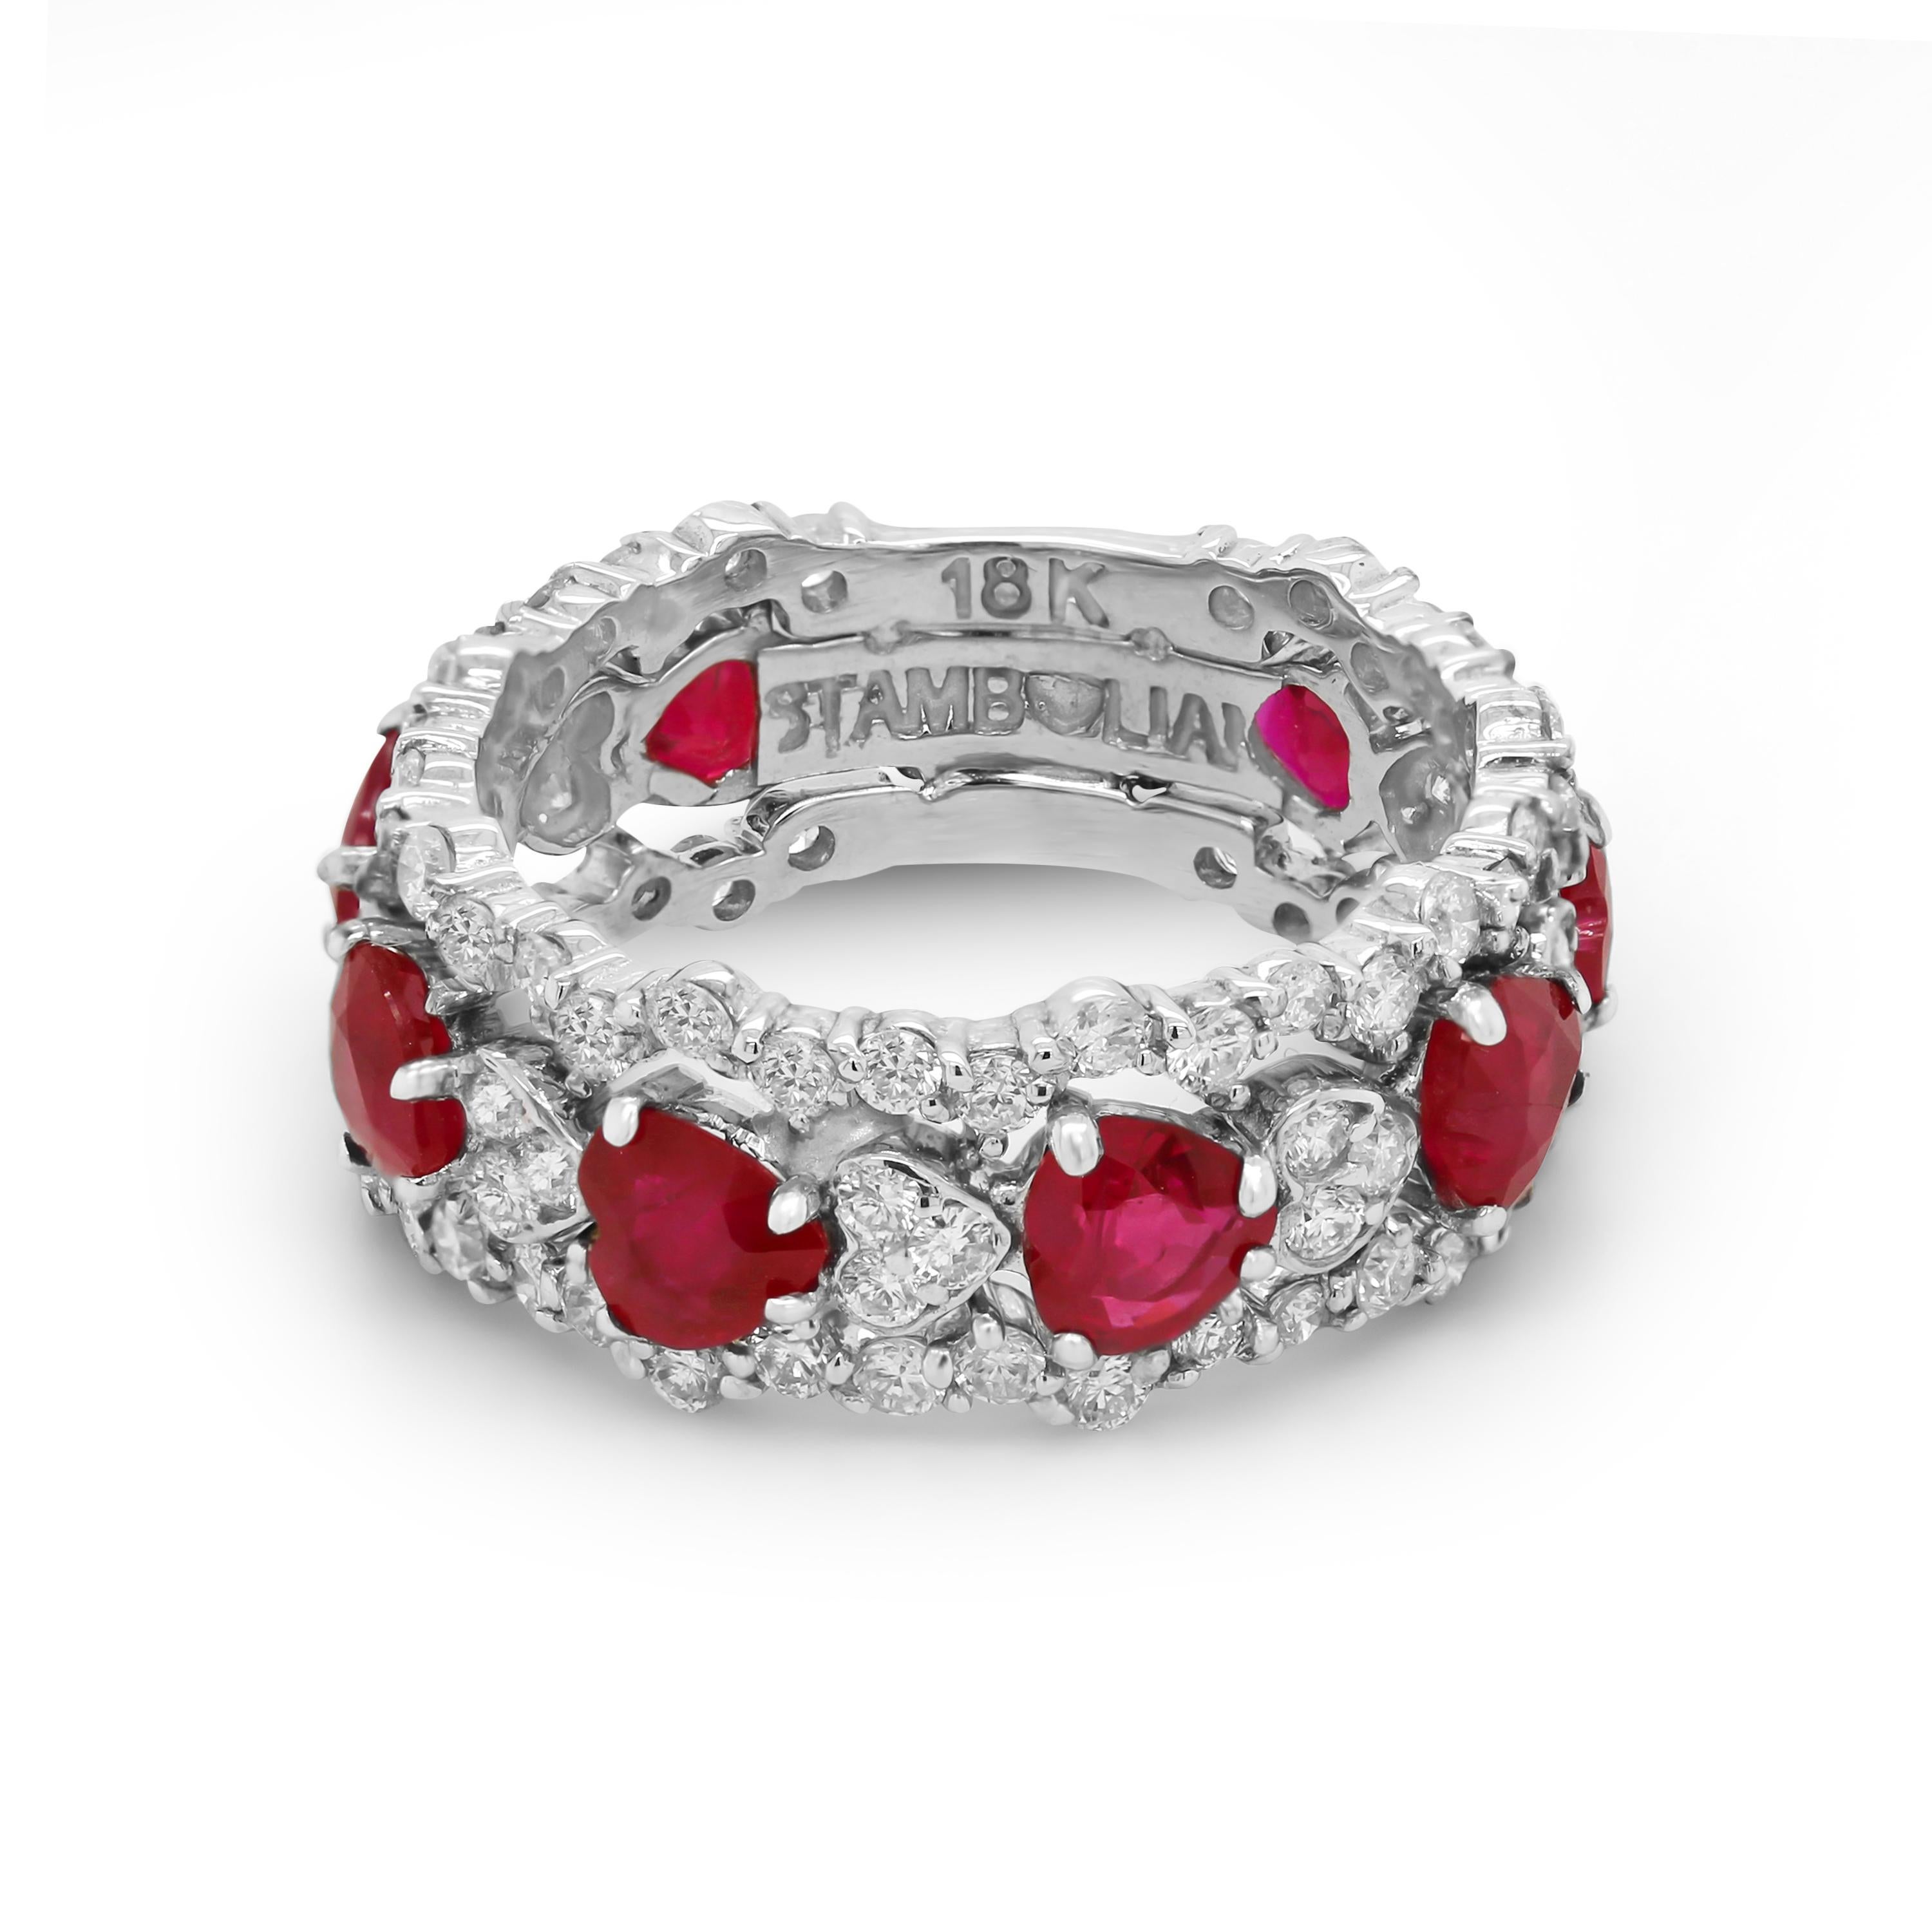 Stambolian 18K White Gold and Diamond Heart Shape Ruby Band Ring

This gorgeous band is set 3/4 of the way with diamonds and ruby all throughout.

2.50 carat Heart Shape Ruby total weight

1.15 carat G color, VS clarity diamonds total weight

7.4mm